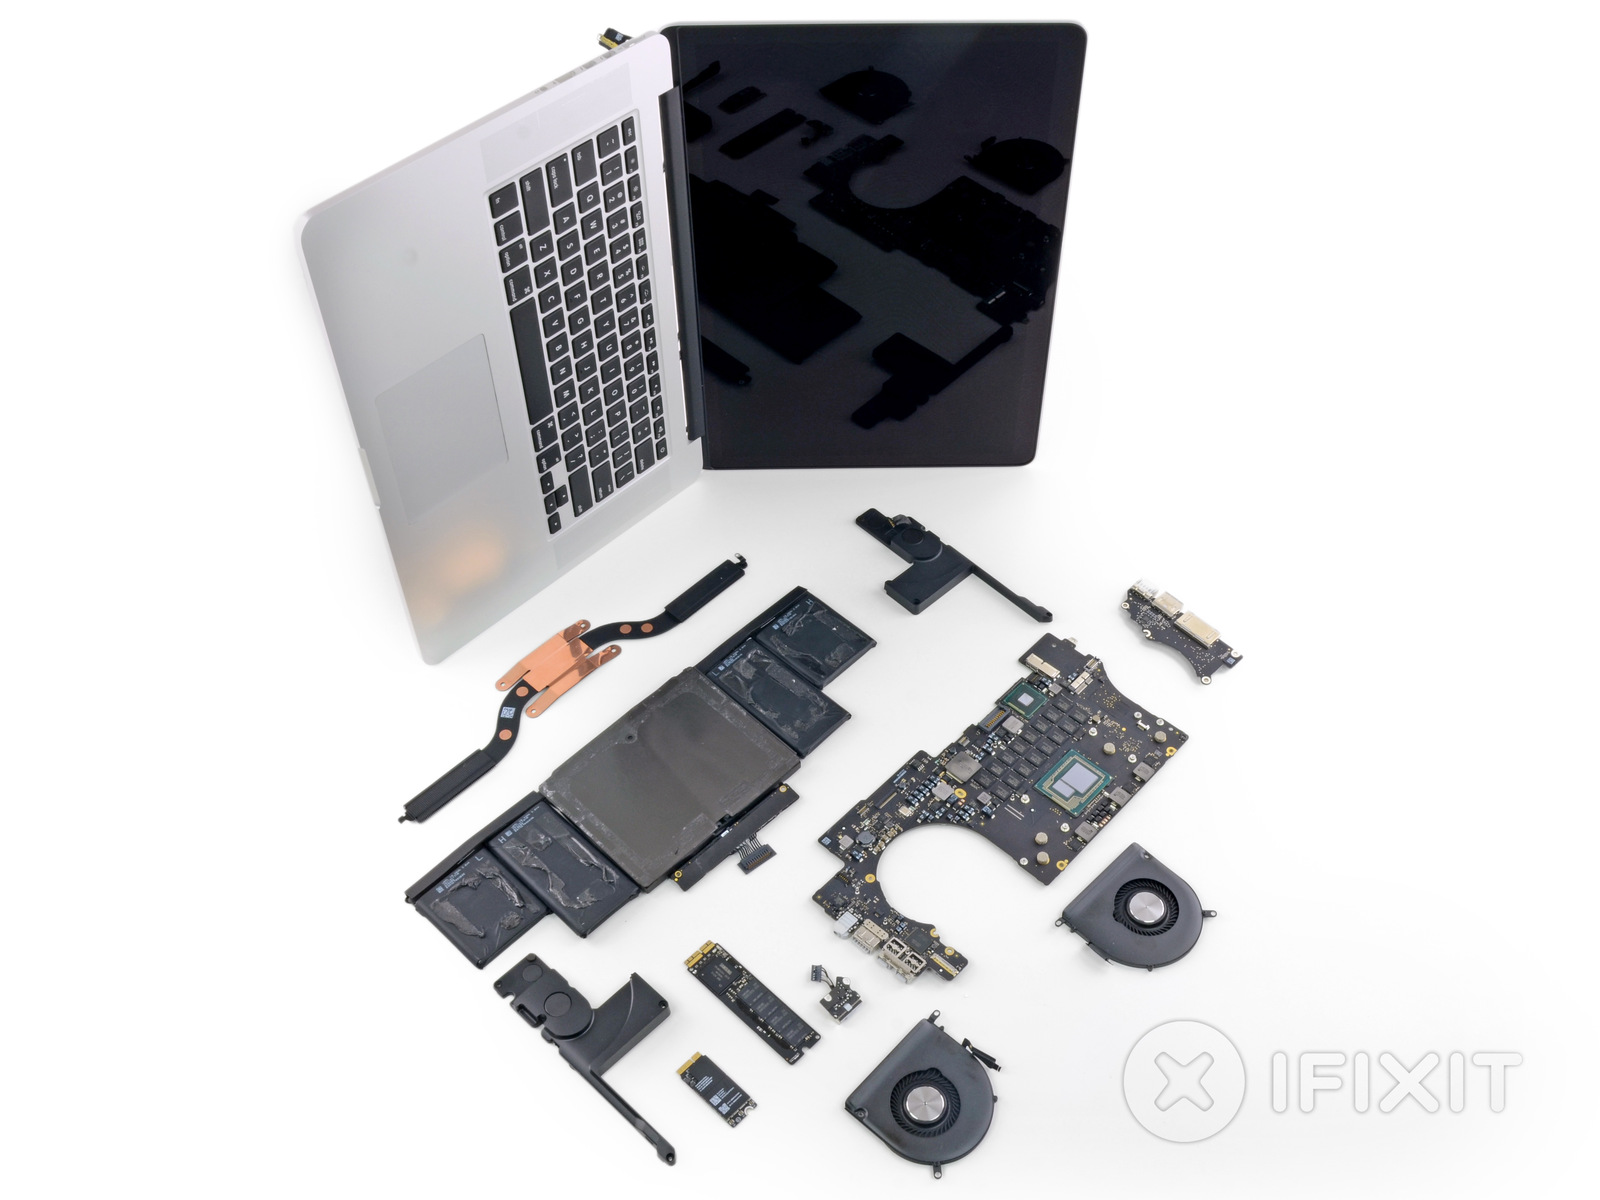 iFixit disassembles the new MacBooks Pro with 13 and 15 inch Retina display